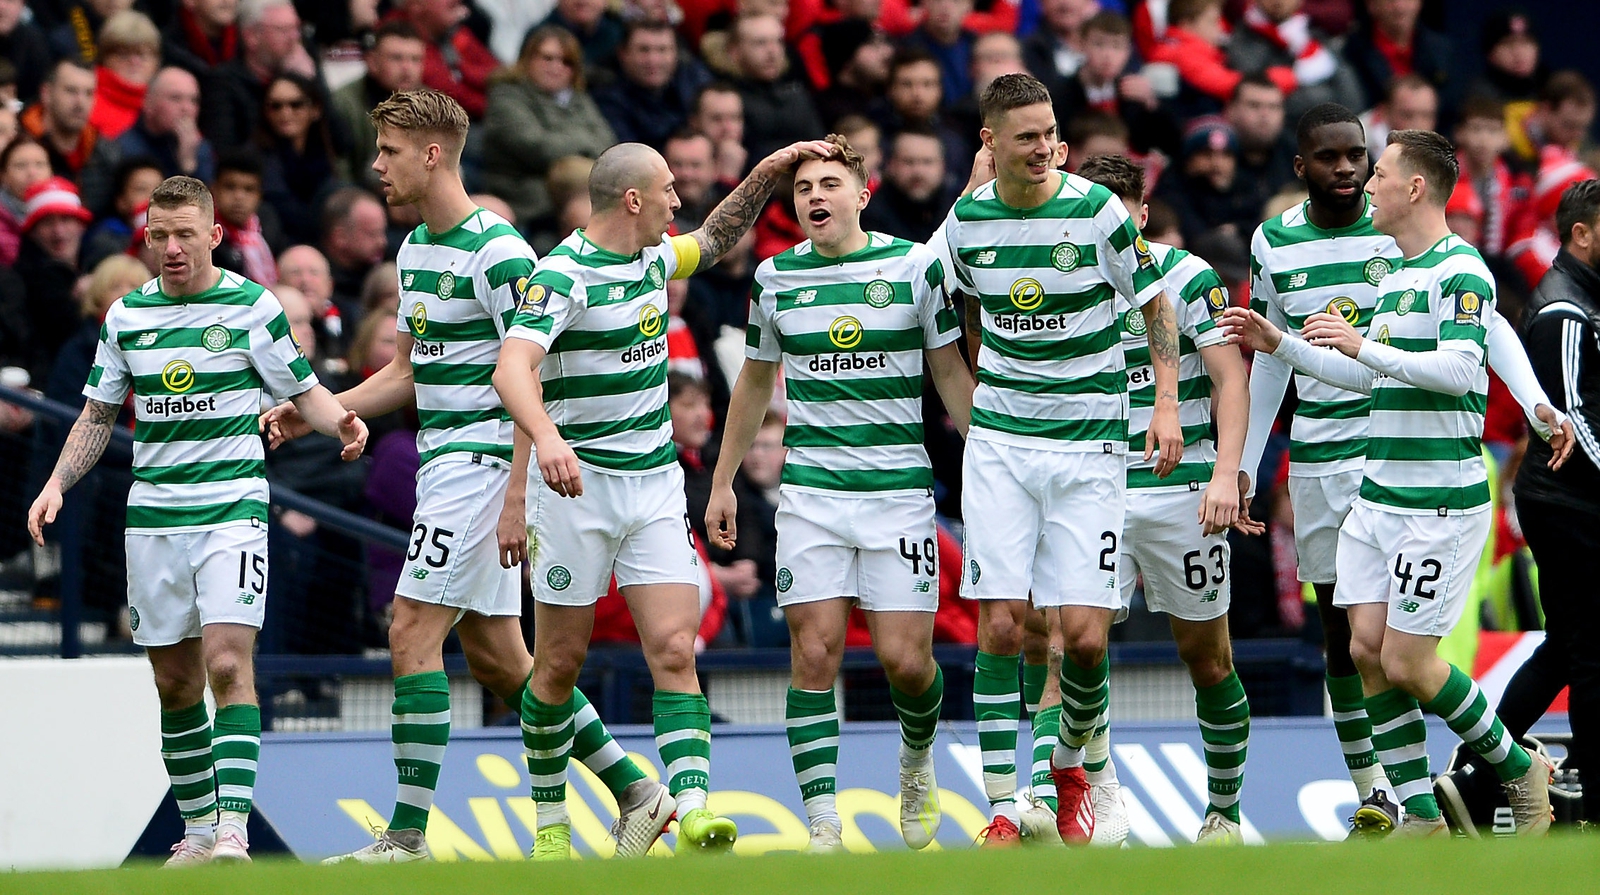 Celtic on course for 'trebletreble' after Aberdeen win